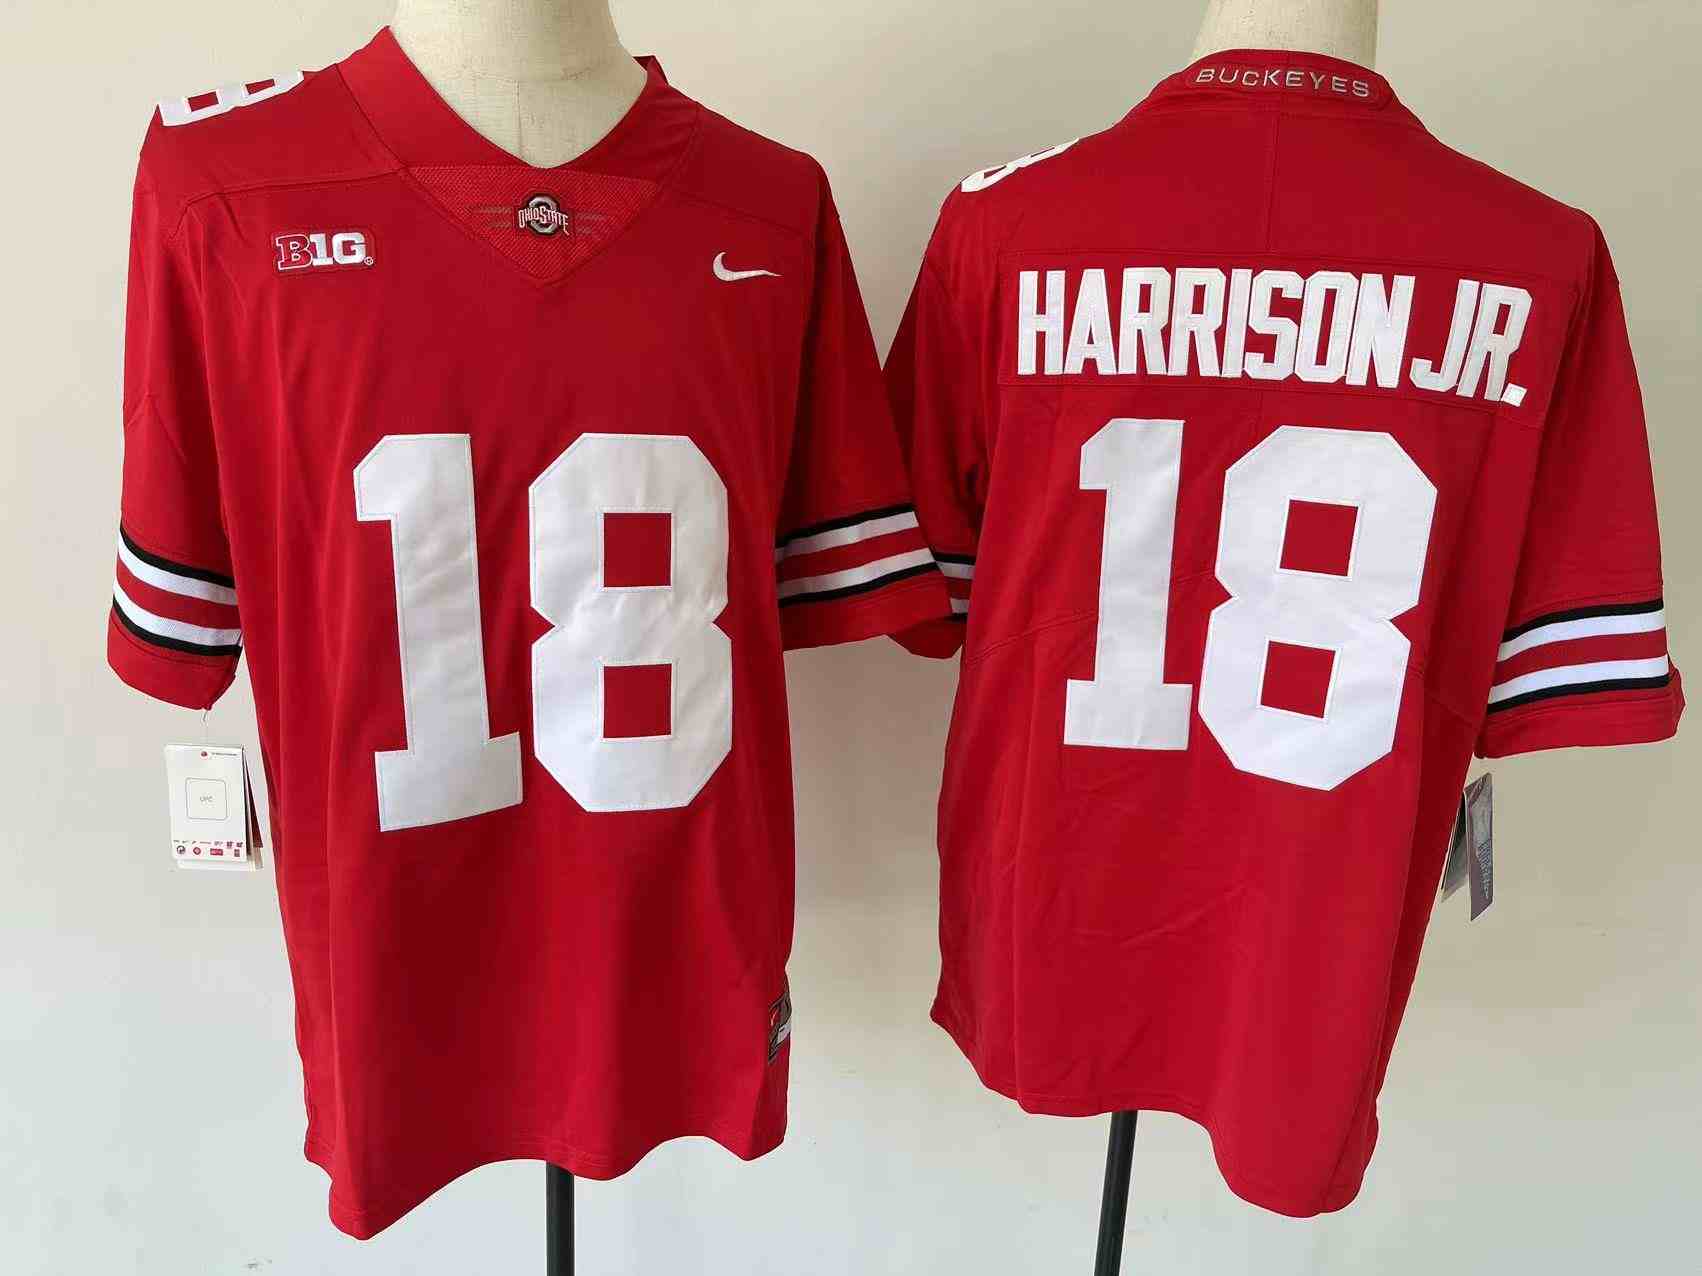 Youth NCAA Ohio State Buckeyes 18 HARRISON JR red College Football Jersey